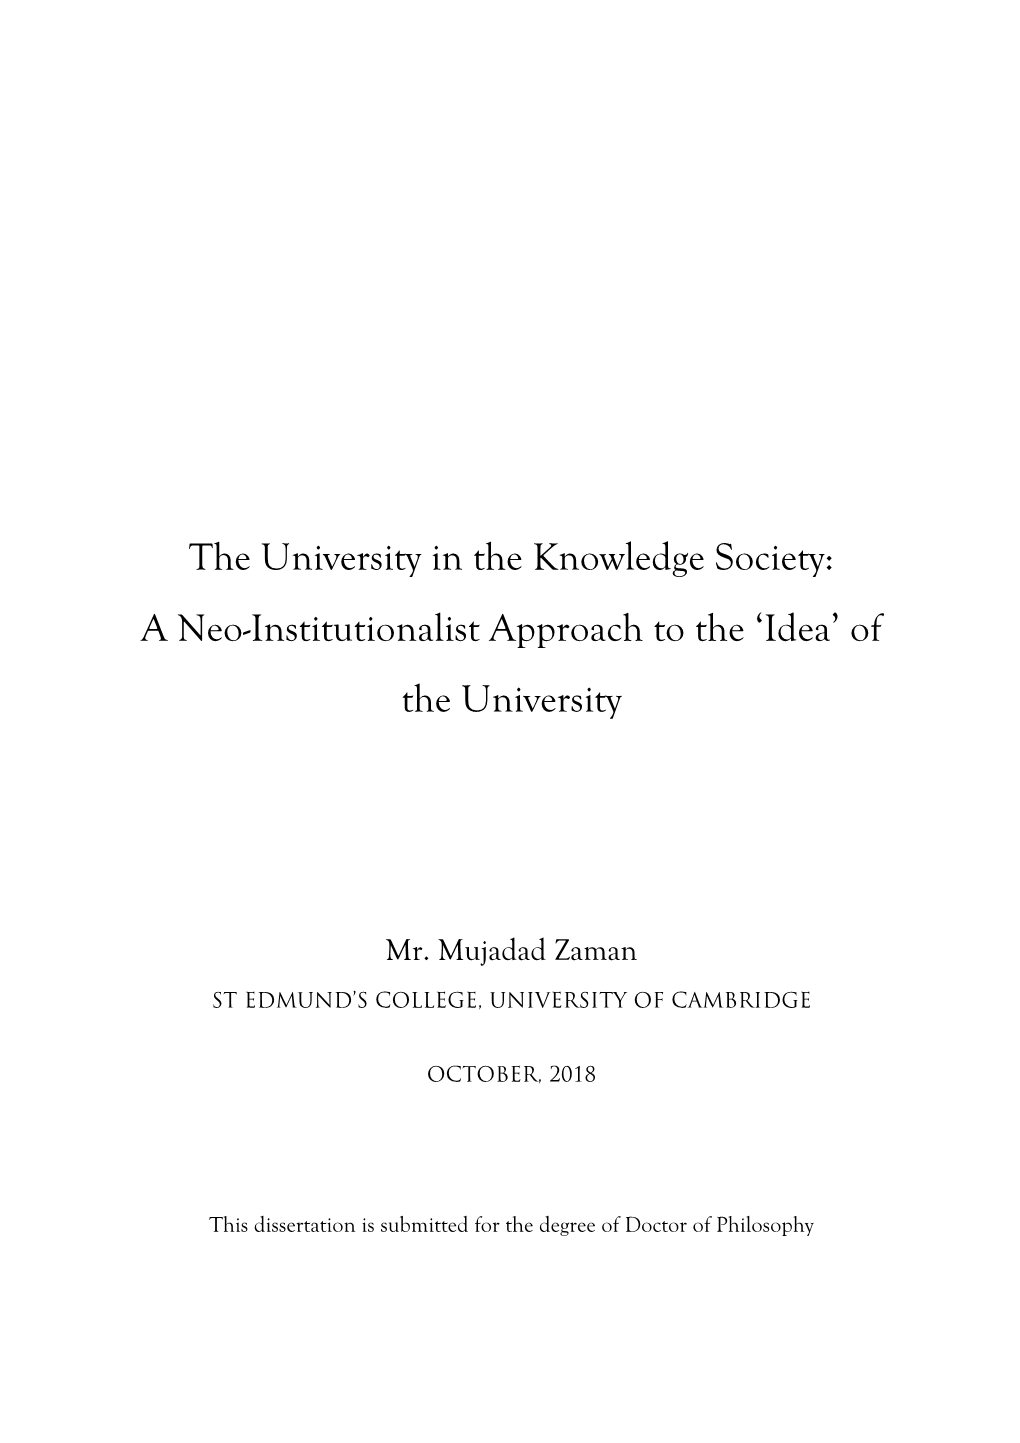 The University in the Knowledge Society: a Neo-Institutionalist Approach to the ‘Idea’ of the University